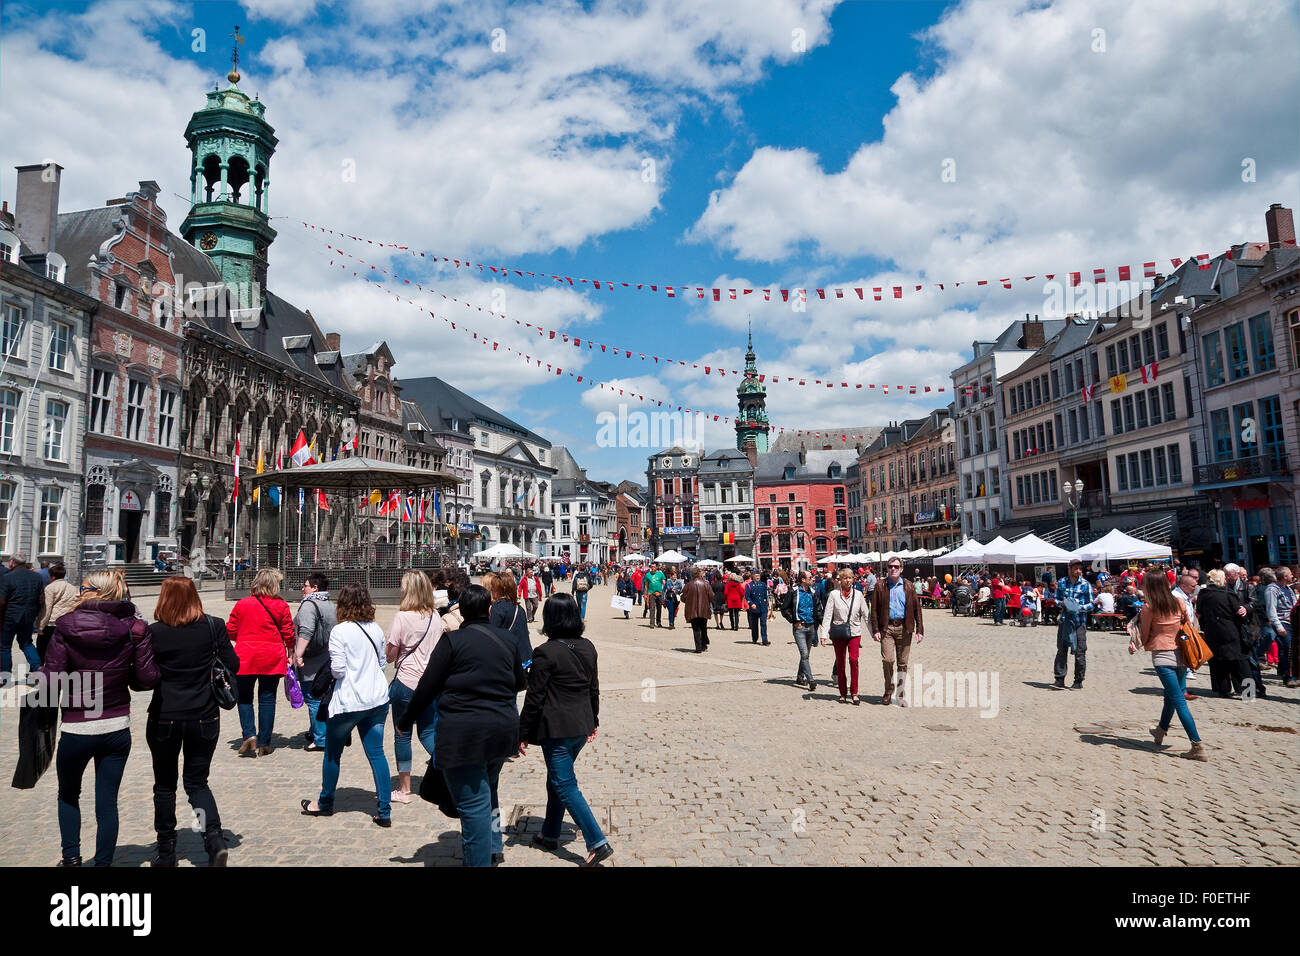 Festival goers in the Main Square of Mons, Belgium, for the annual Doudou festival Stock Photo